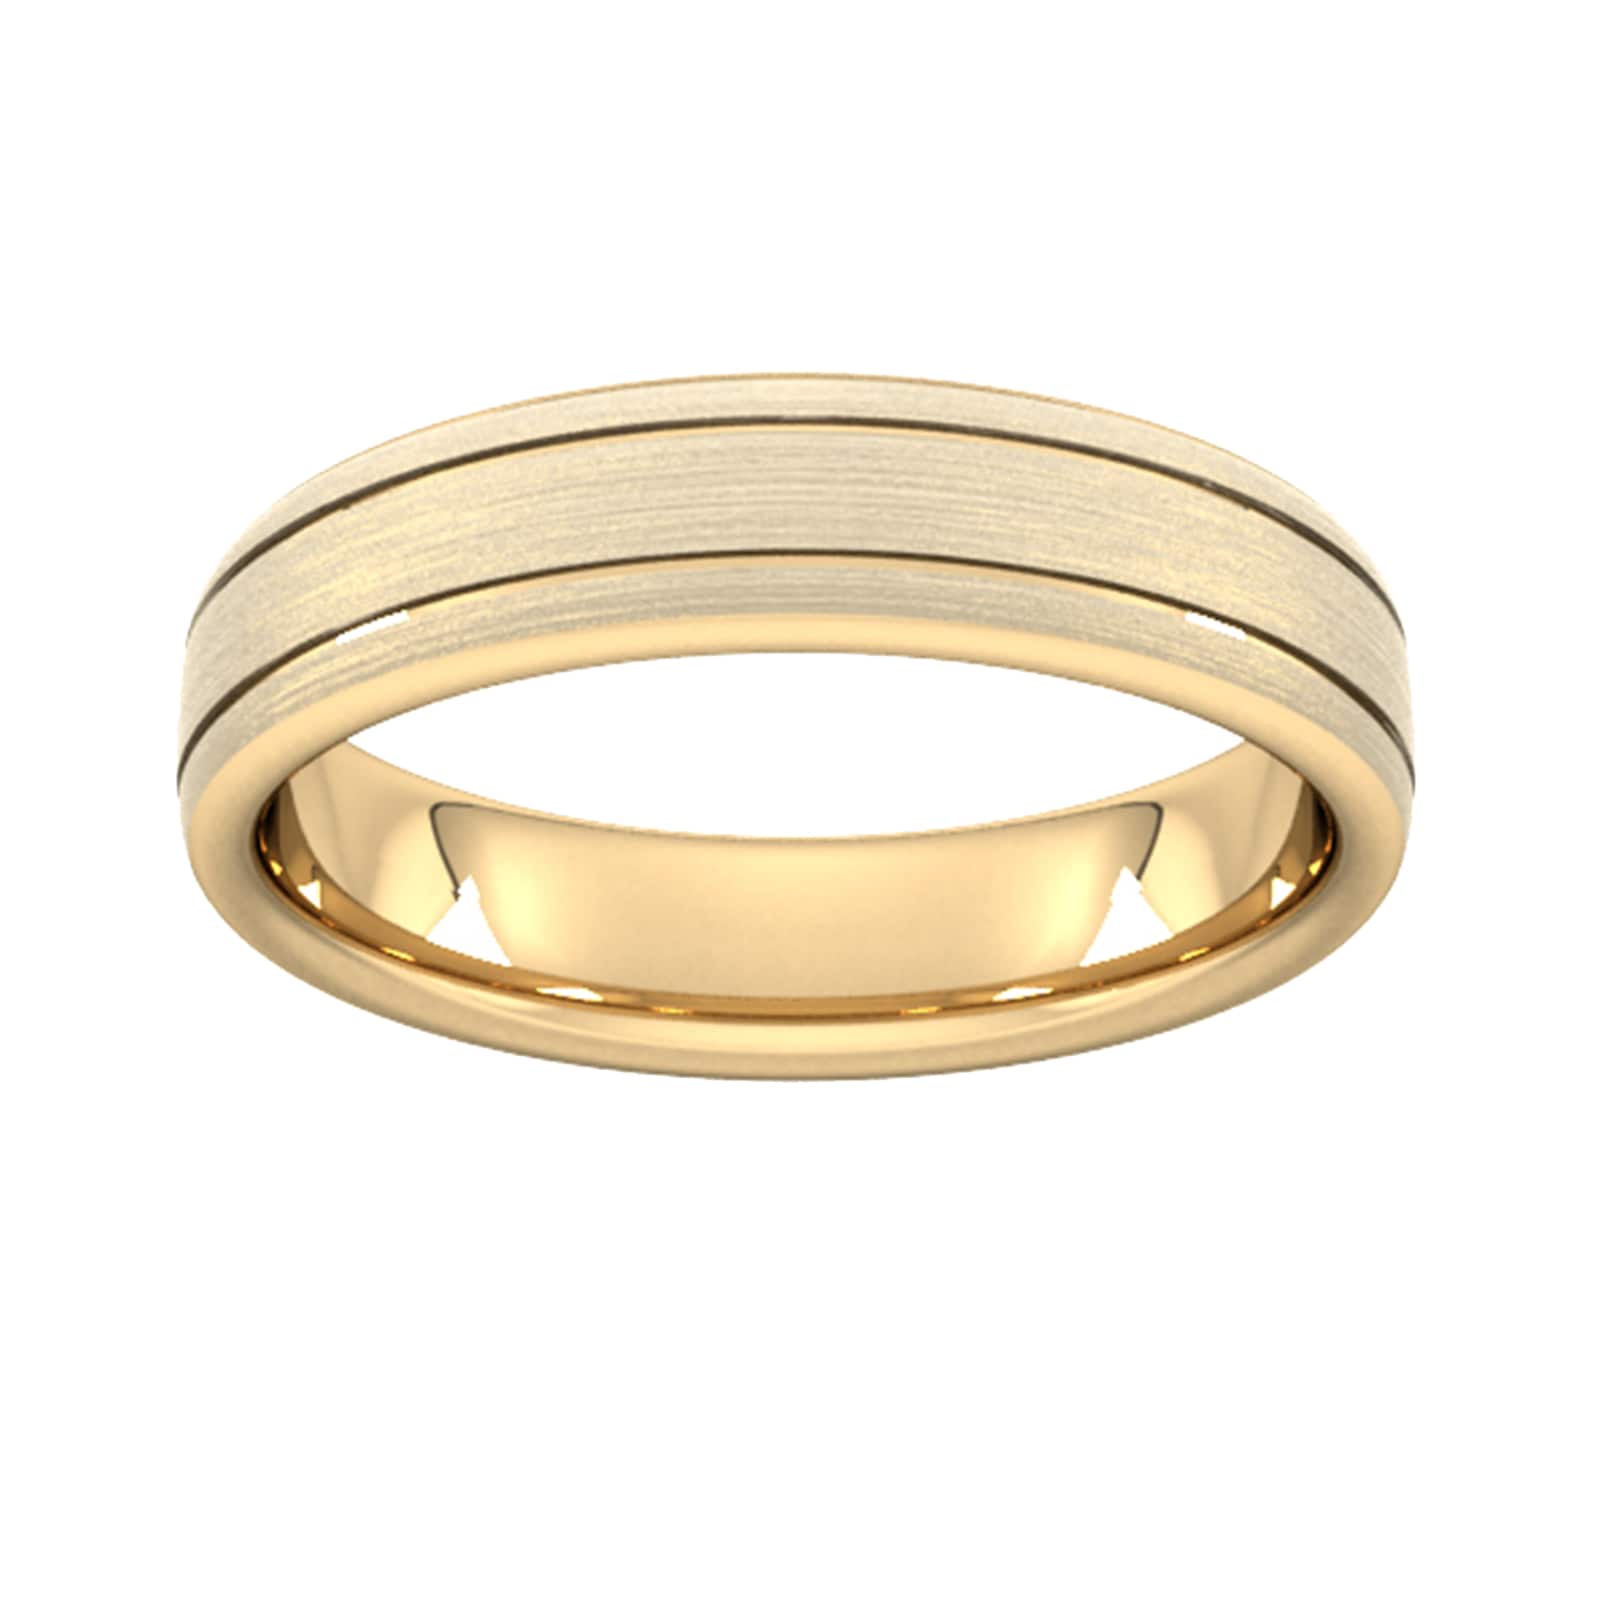 5mm Traditional Court Standard Matt Finish With Double Grooves Wedding Ring In 9 Carat Yellow Gold - Ring Size I